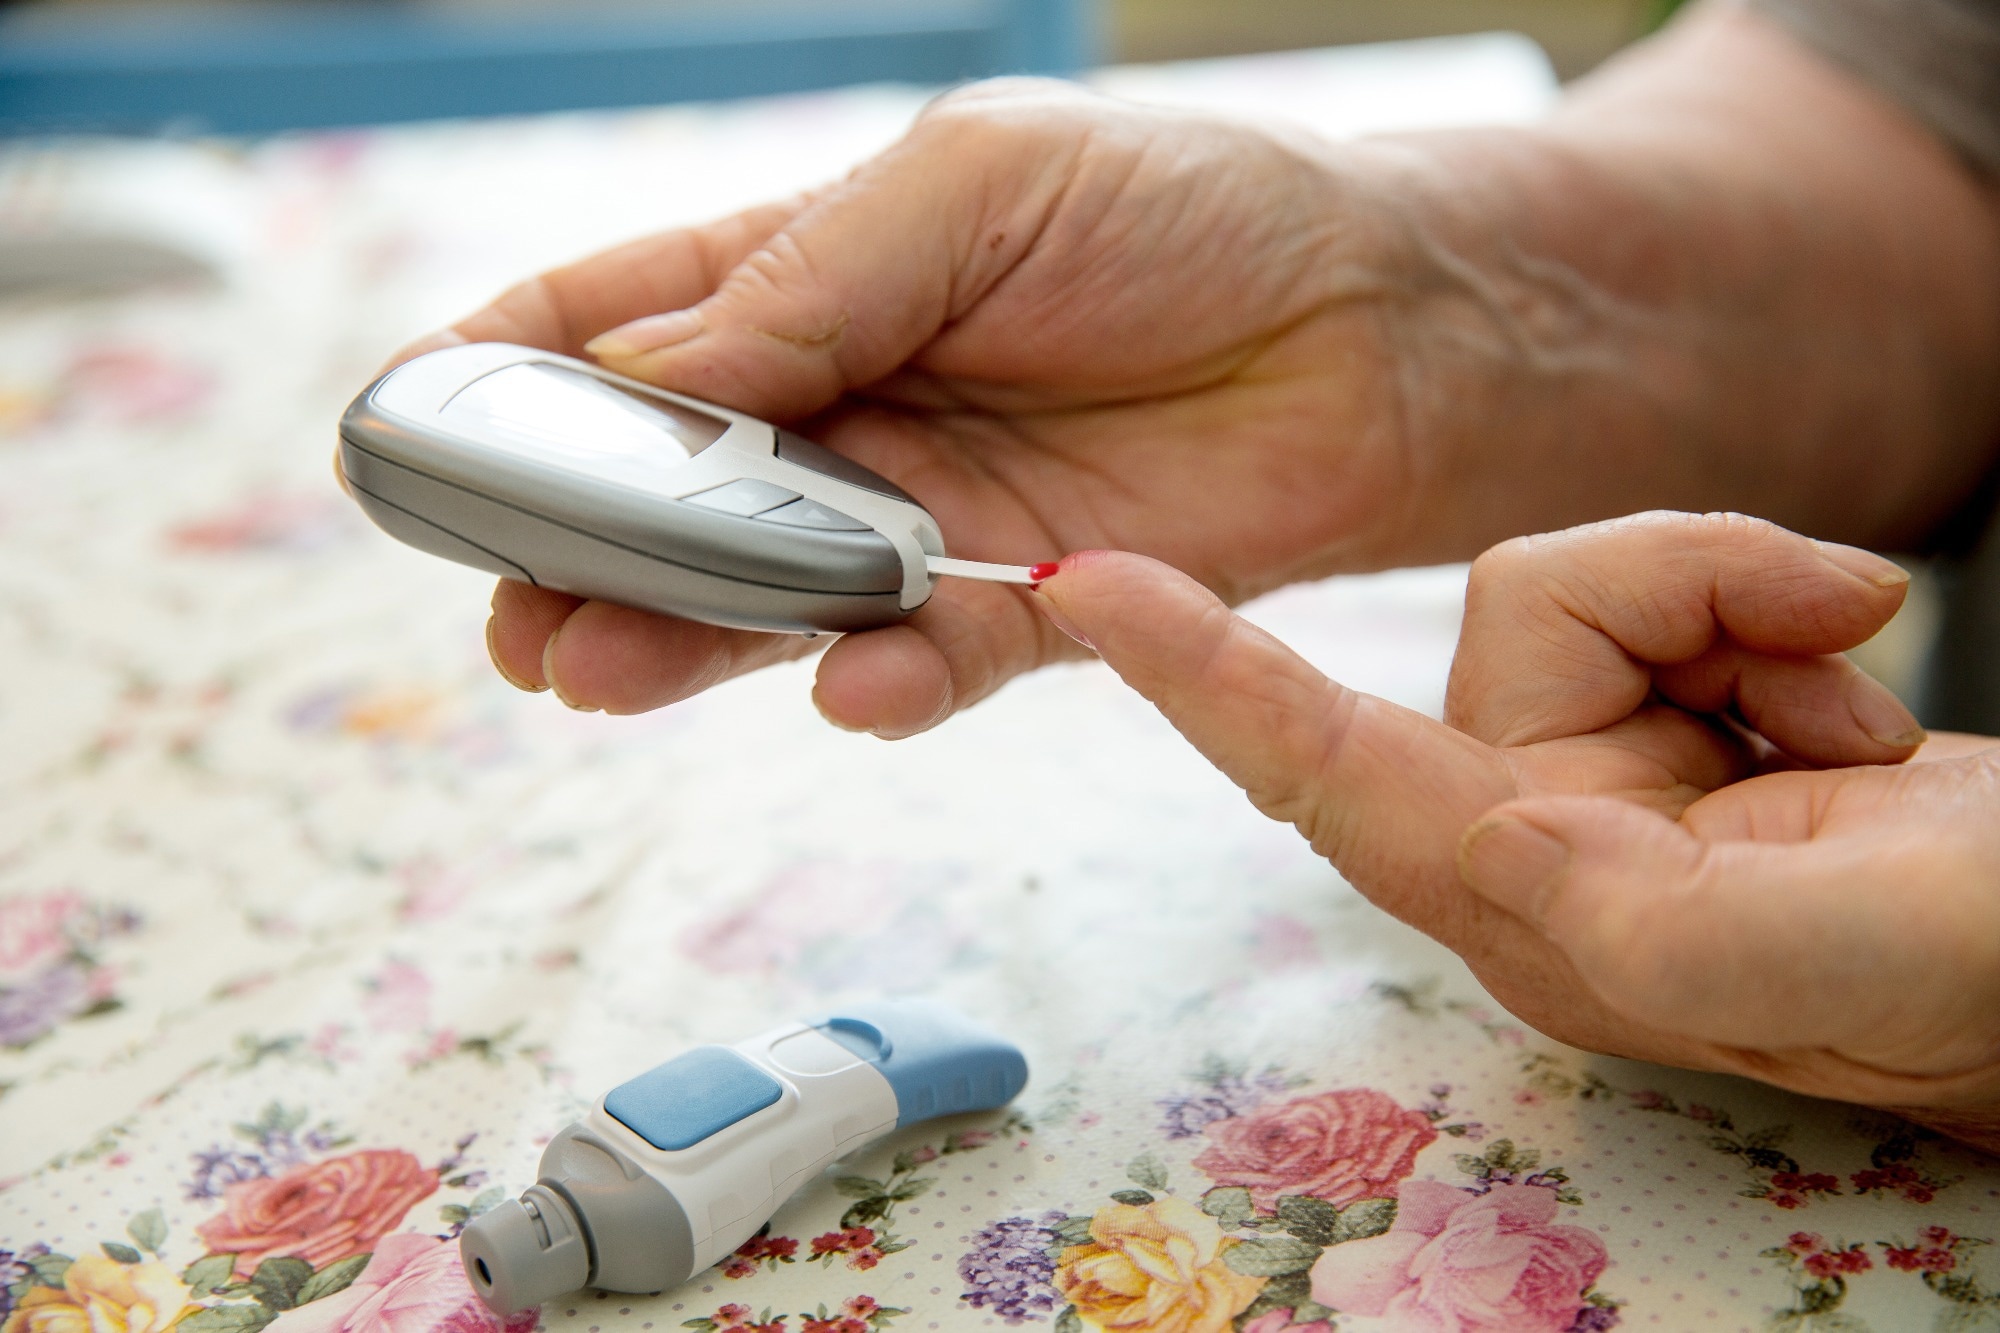 Study: Efficacy and Safety of Oral Small Molecule Glucagon-Like Peptide 1 Receptor Agonist Danuglipron for Glycemic Control Among Patients With Type 2 Diabetes. Image  Credit: urbans/Shutterstock.com